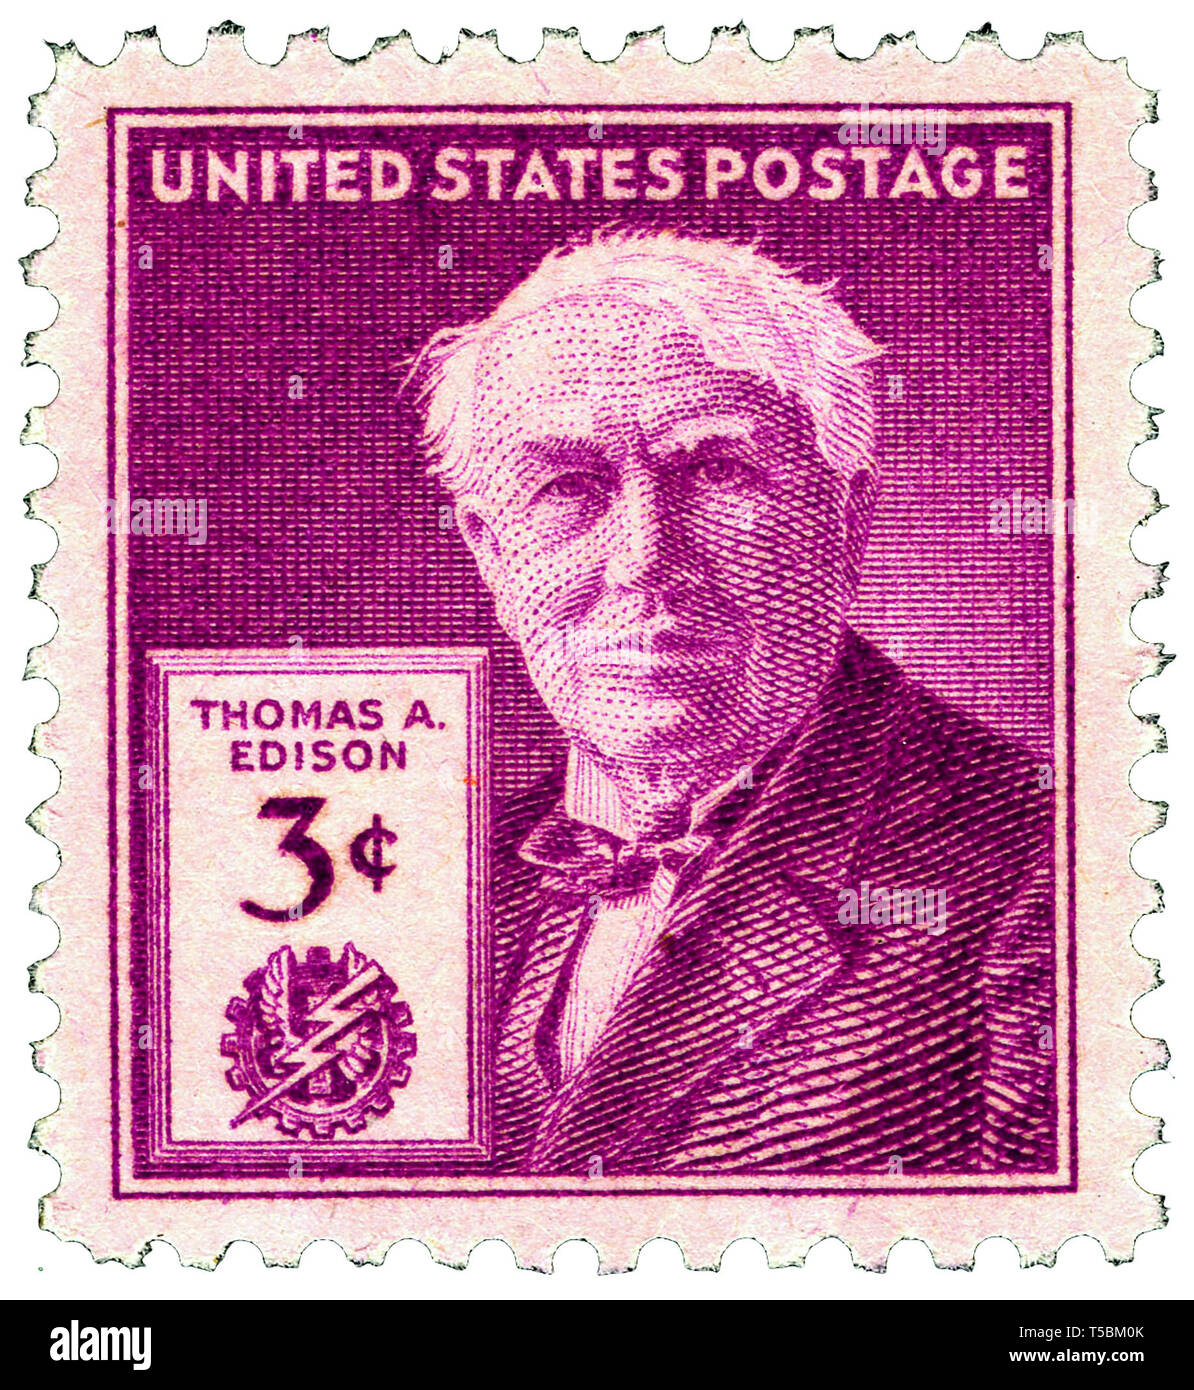 Thomas Edison (1847-1931) 3-cent 1947 issue U.S. stamp, released to mark the 100th anniversary of his birth, 11 February 1947, US Postal Service Stock Photo